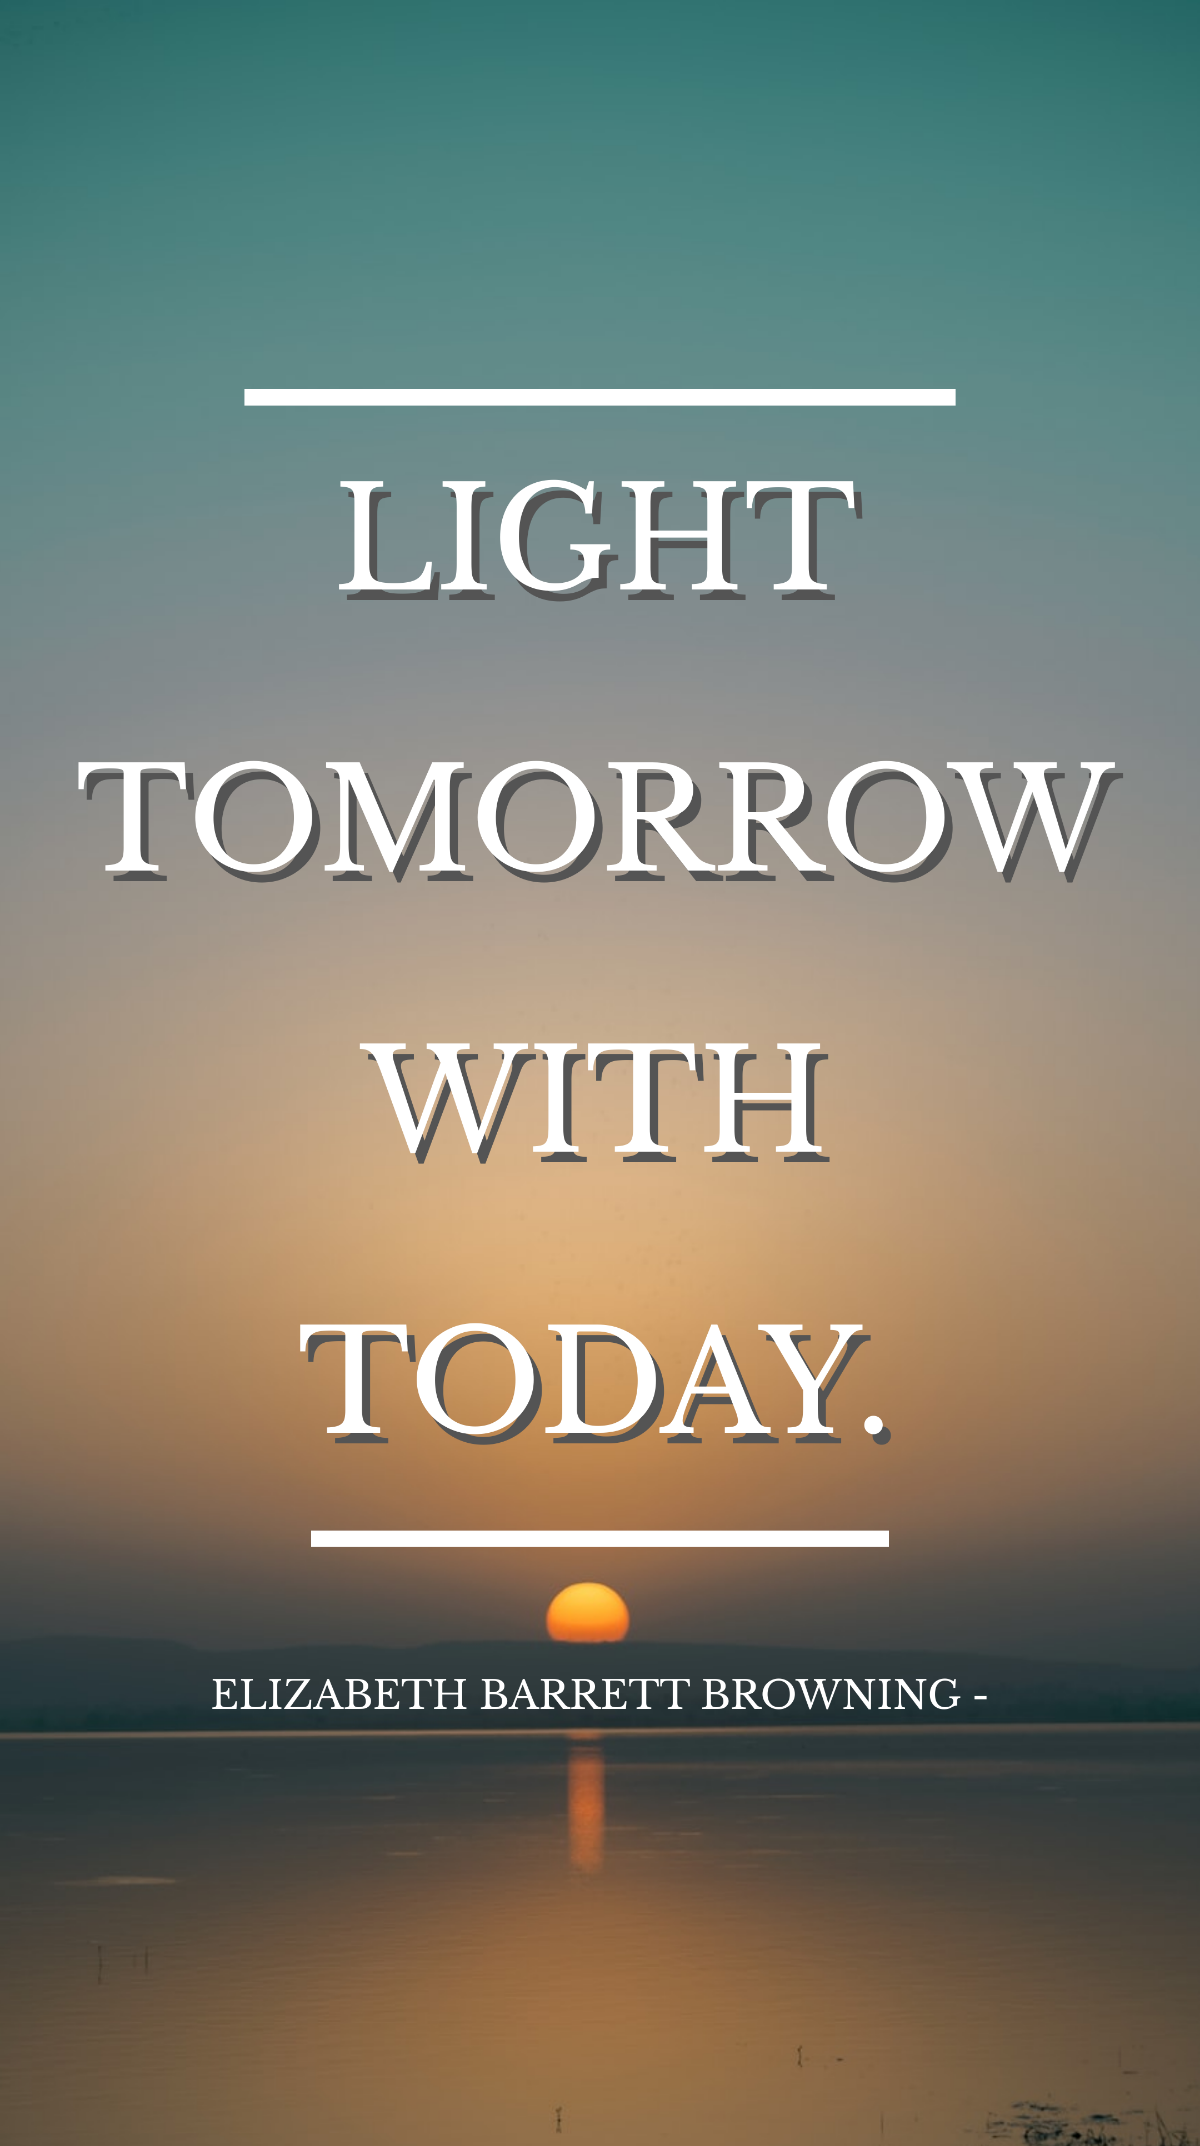 Elizabeth Barrett Browning - Light tomorrow with today. Template